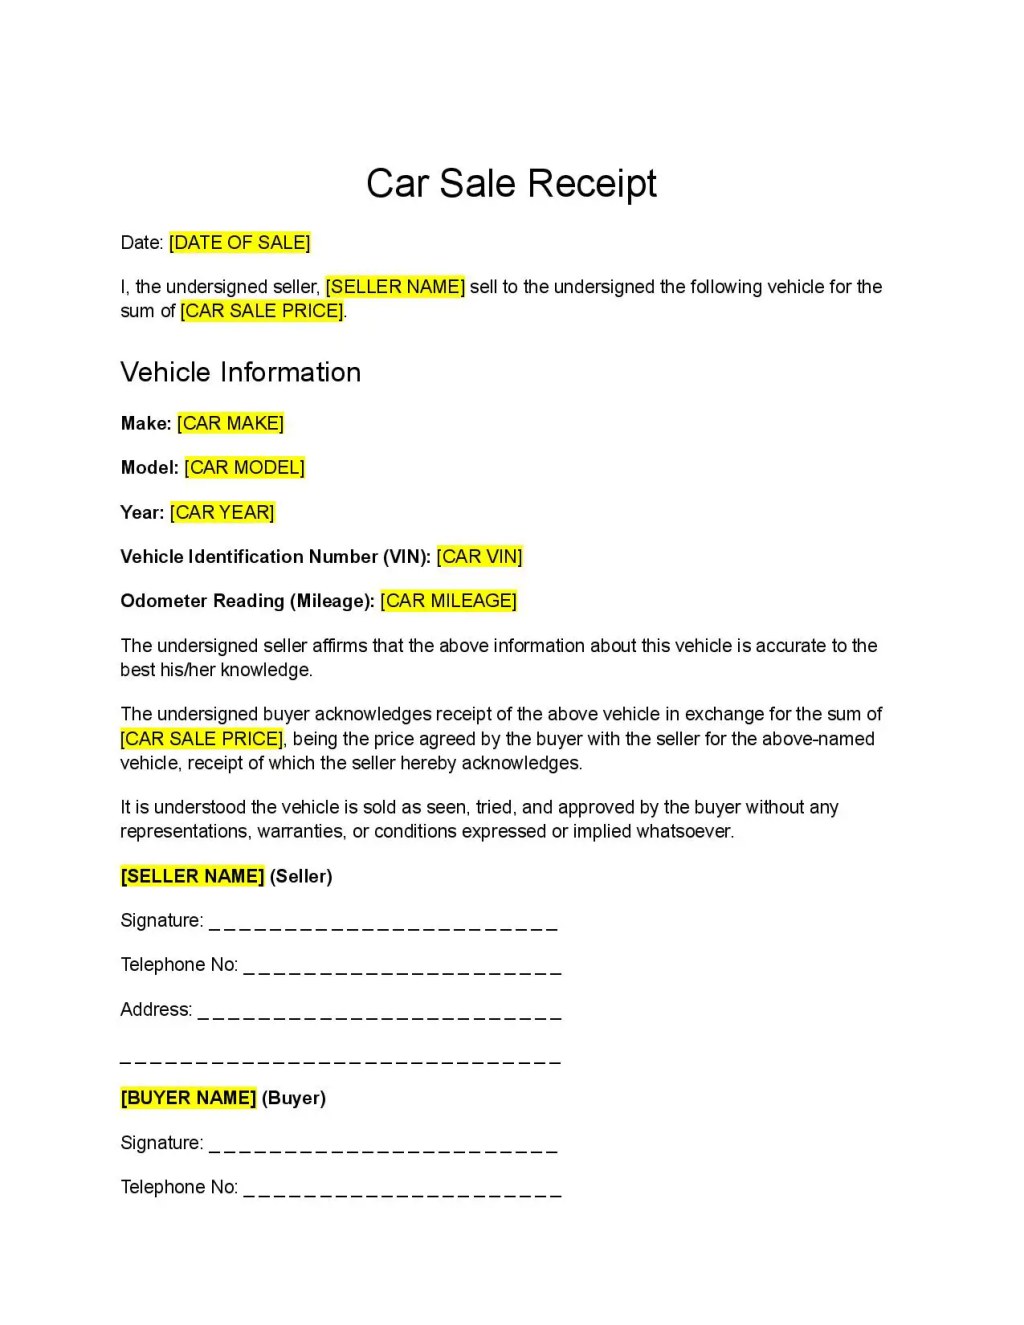 Picture of: Car Sale Receipt Template – Free Download – Easy Legal Docs